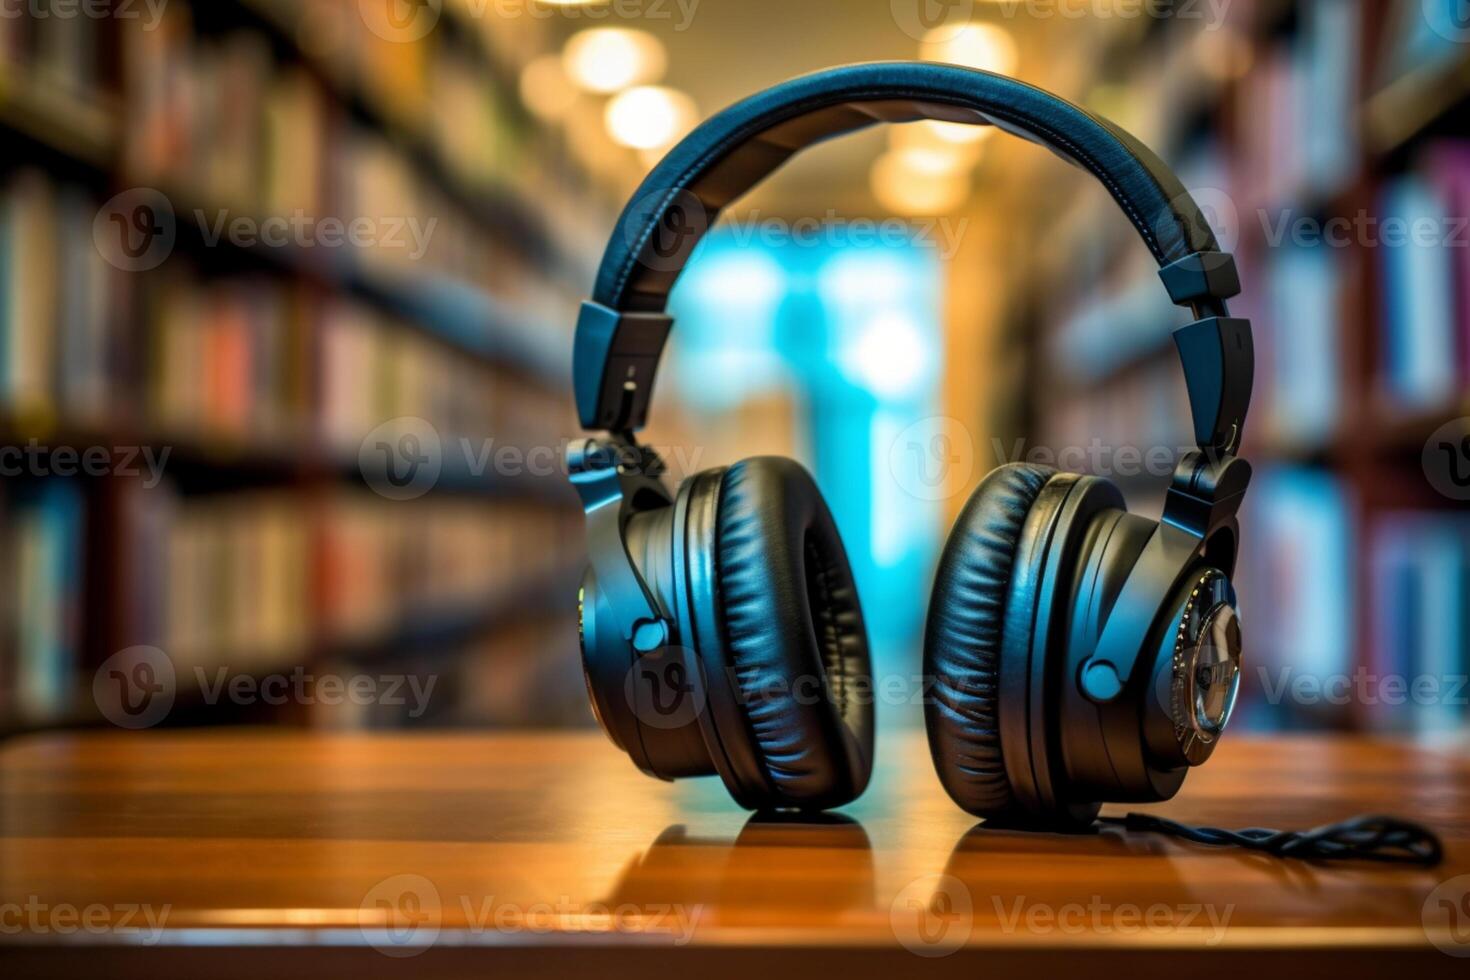 Auditory literary journey, Headphones in a library setting, emphasizing audio books photo